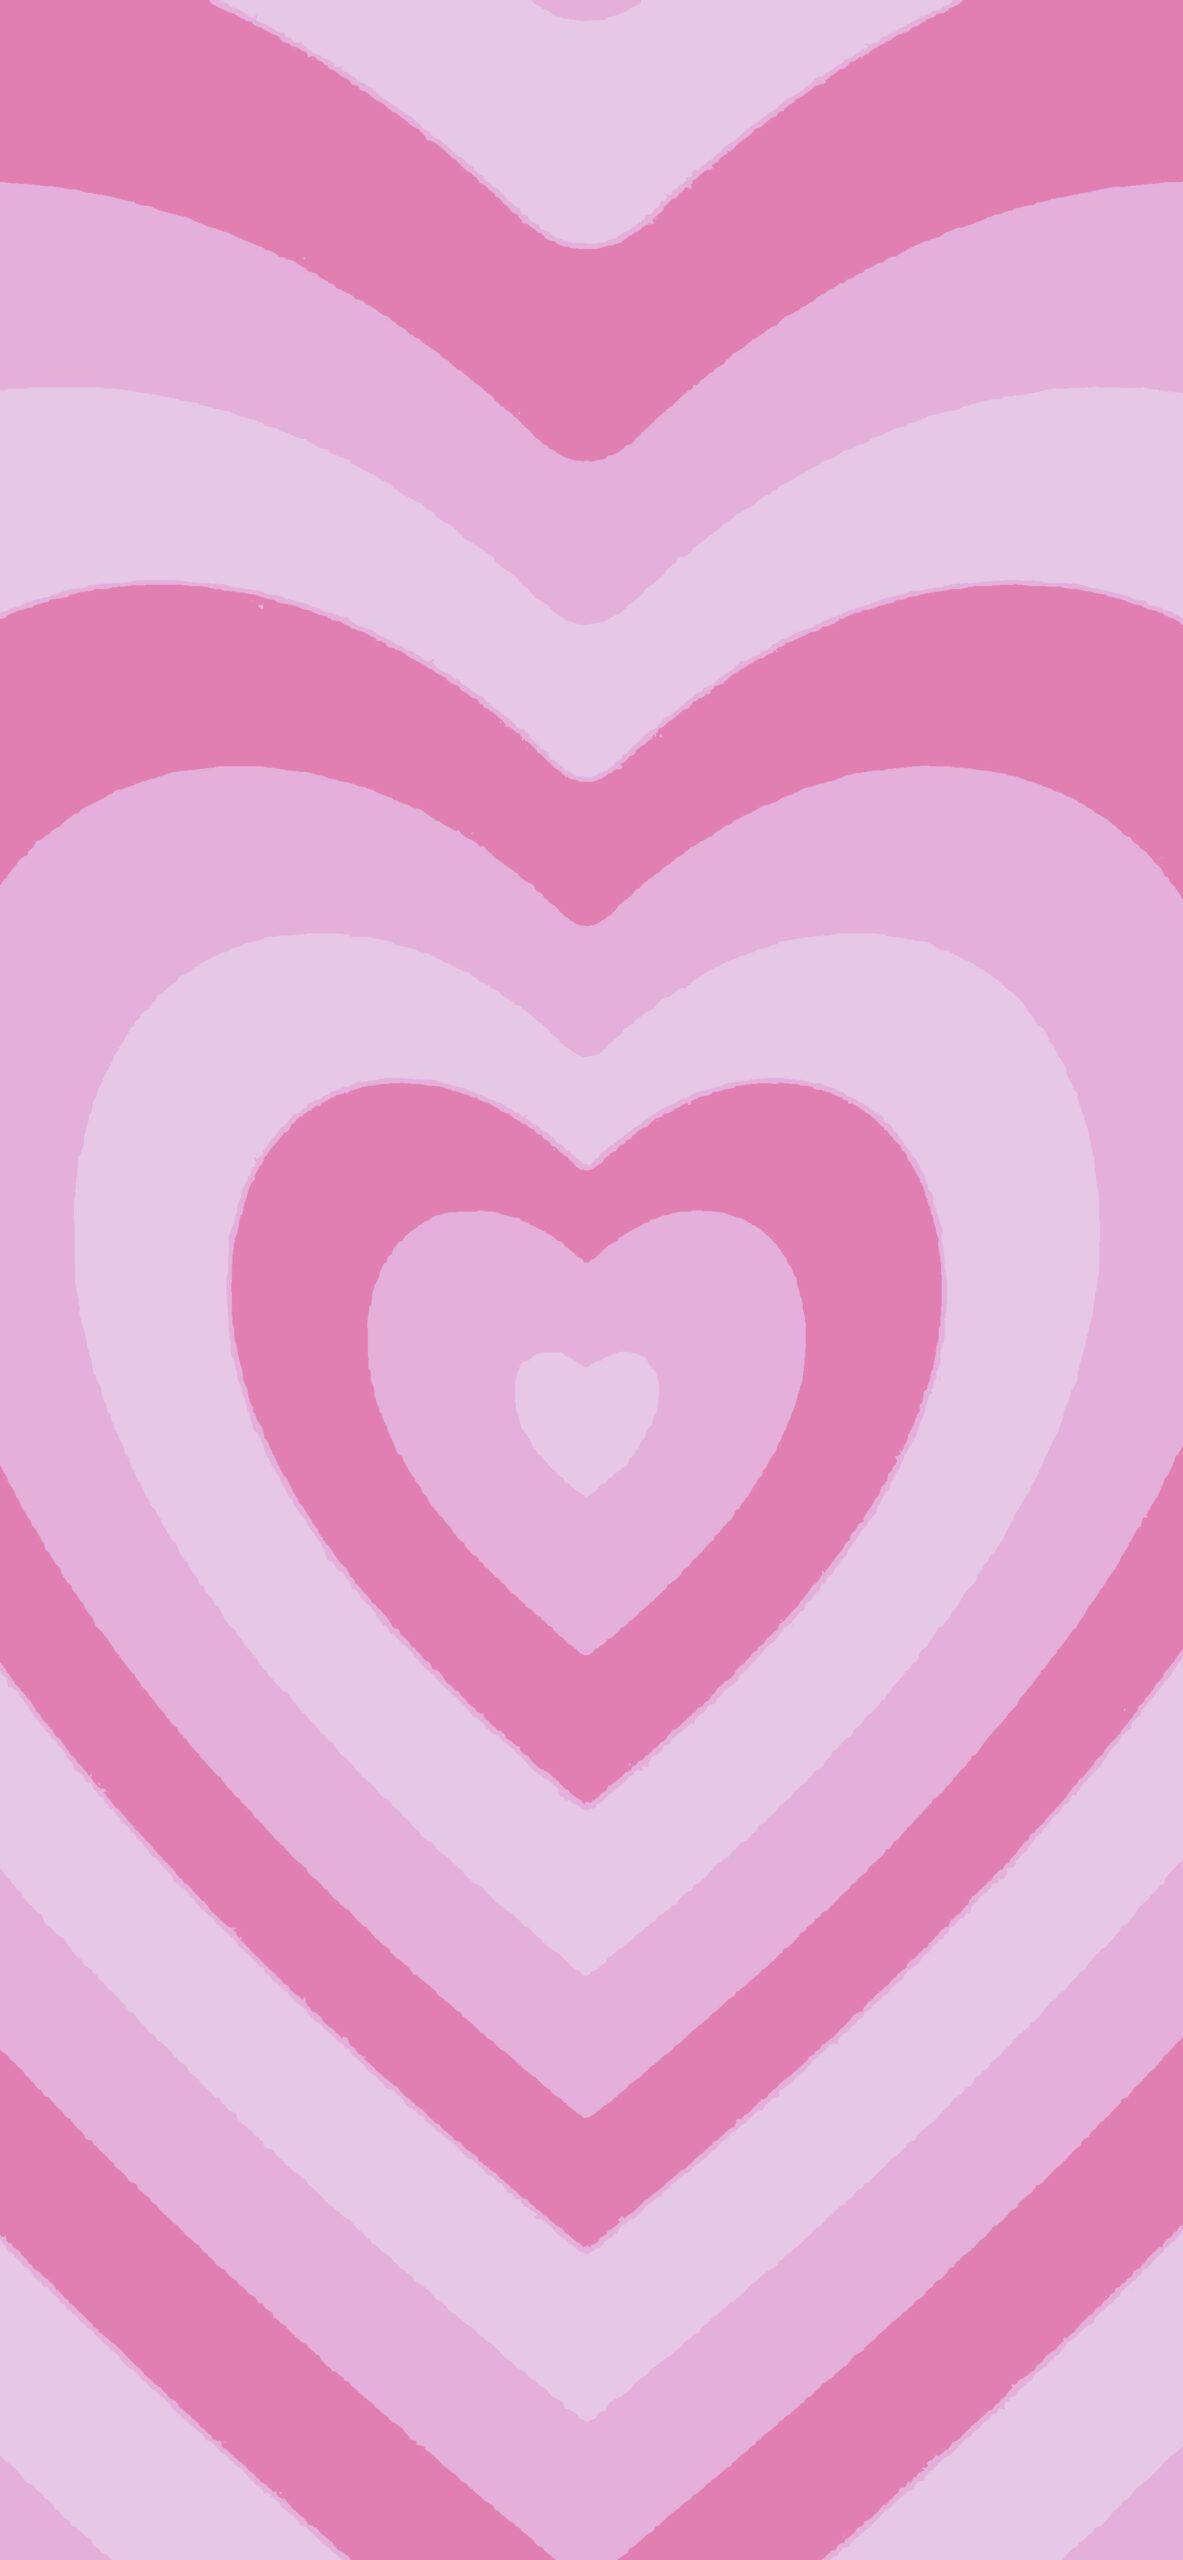 A pink heart shaped pattern on the wall - Heart, cute pink, soft pink, pink phone, pink, hot pink, pink heart, light pink, Android, magenta